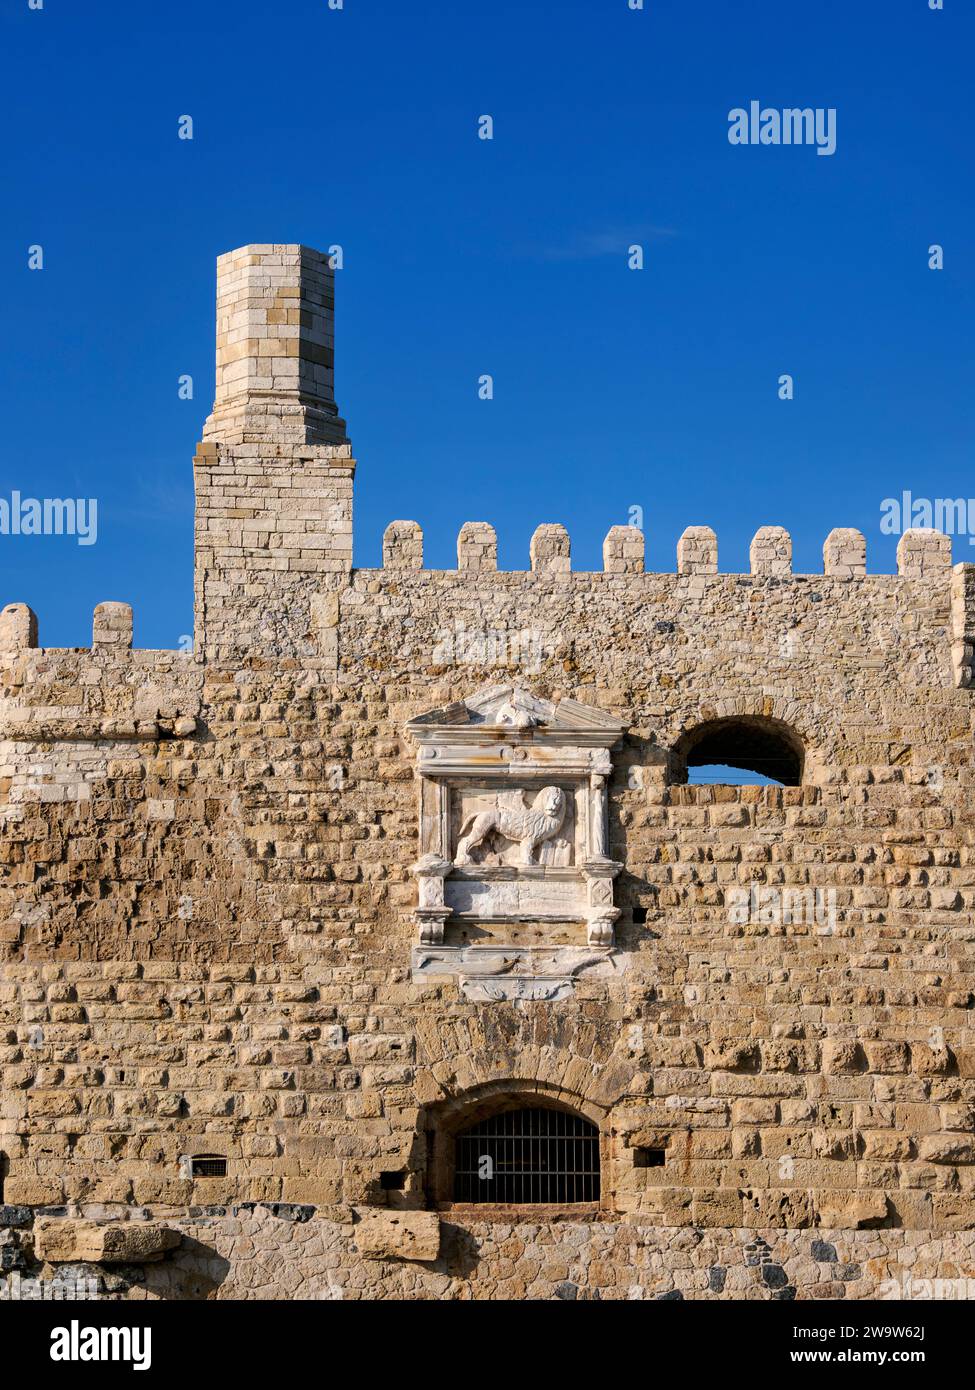 The Koules Fortress, detailed view, City of Heraklion, Crete, Greece Stock Photo